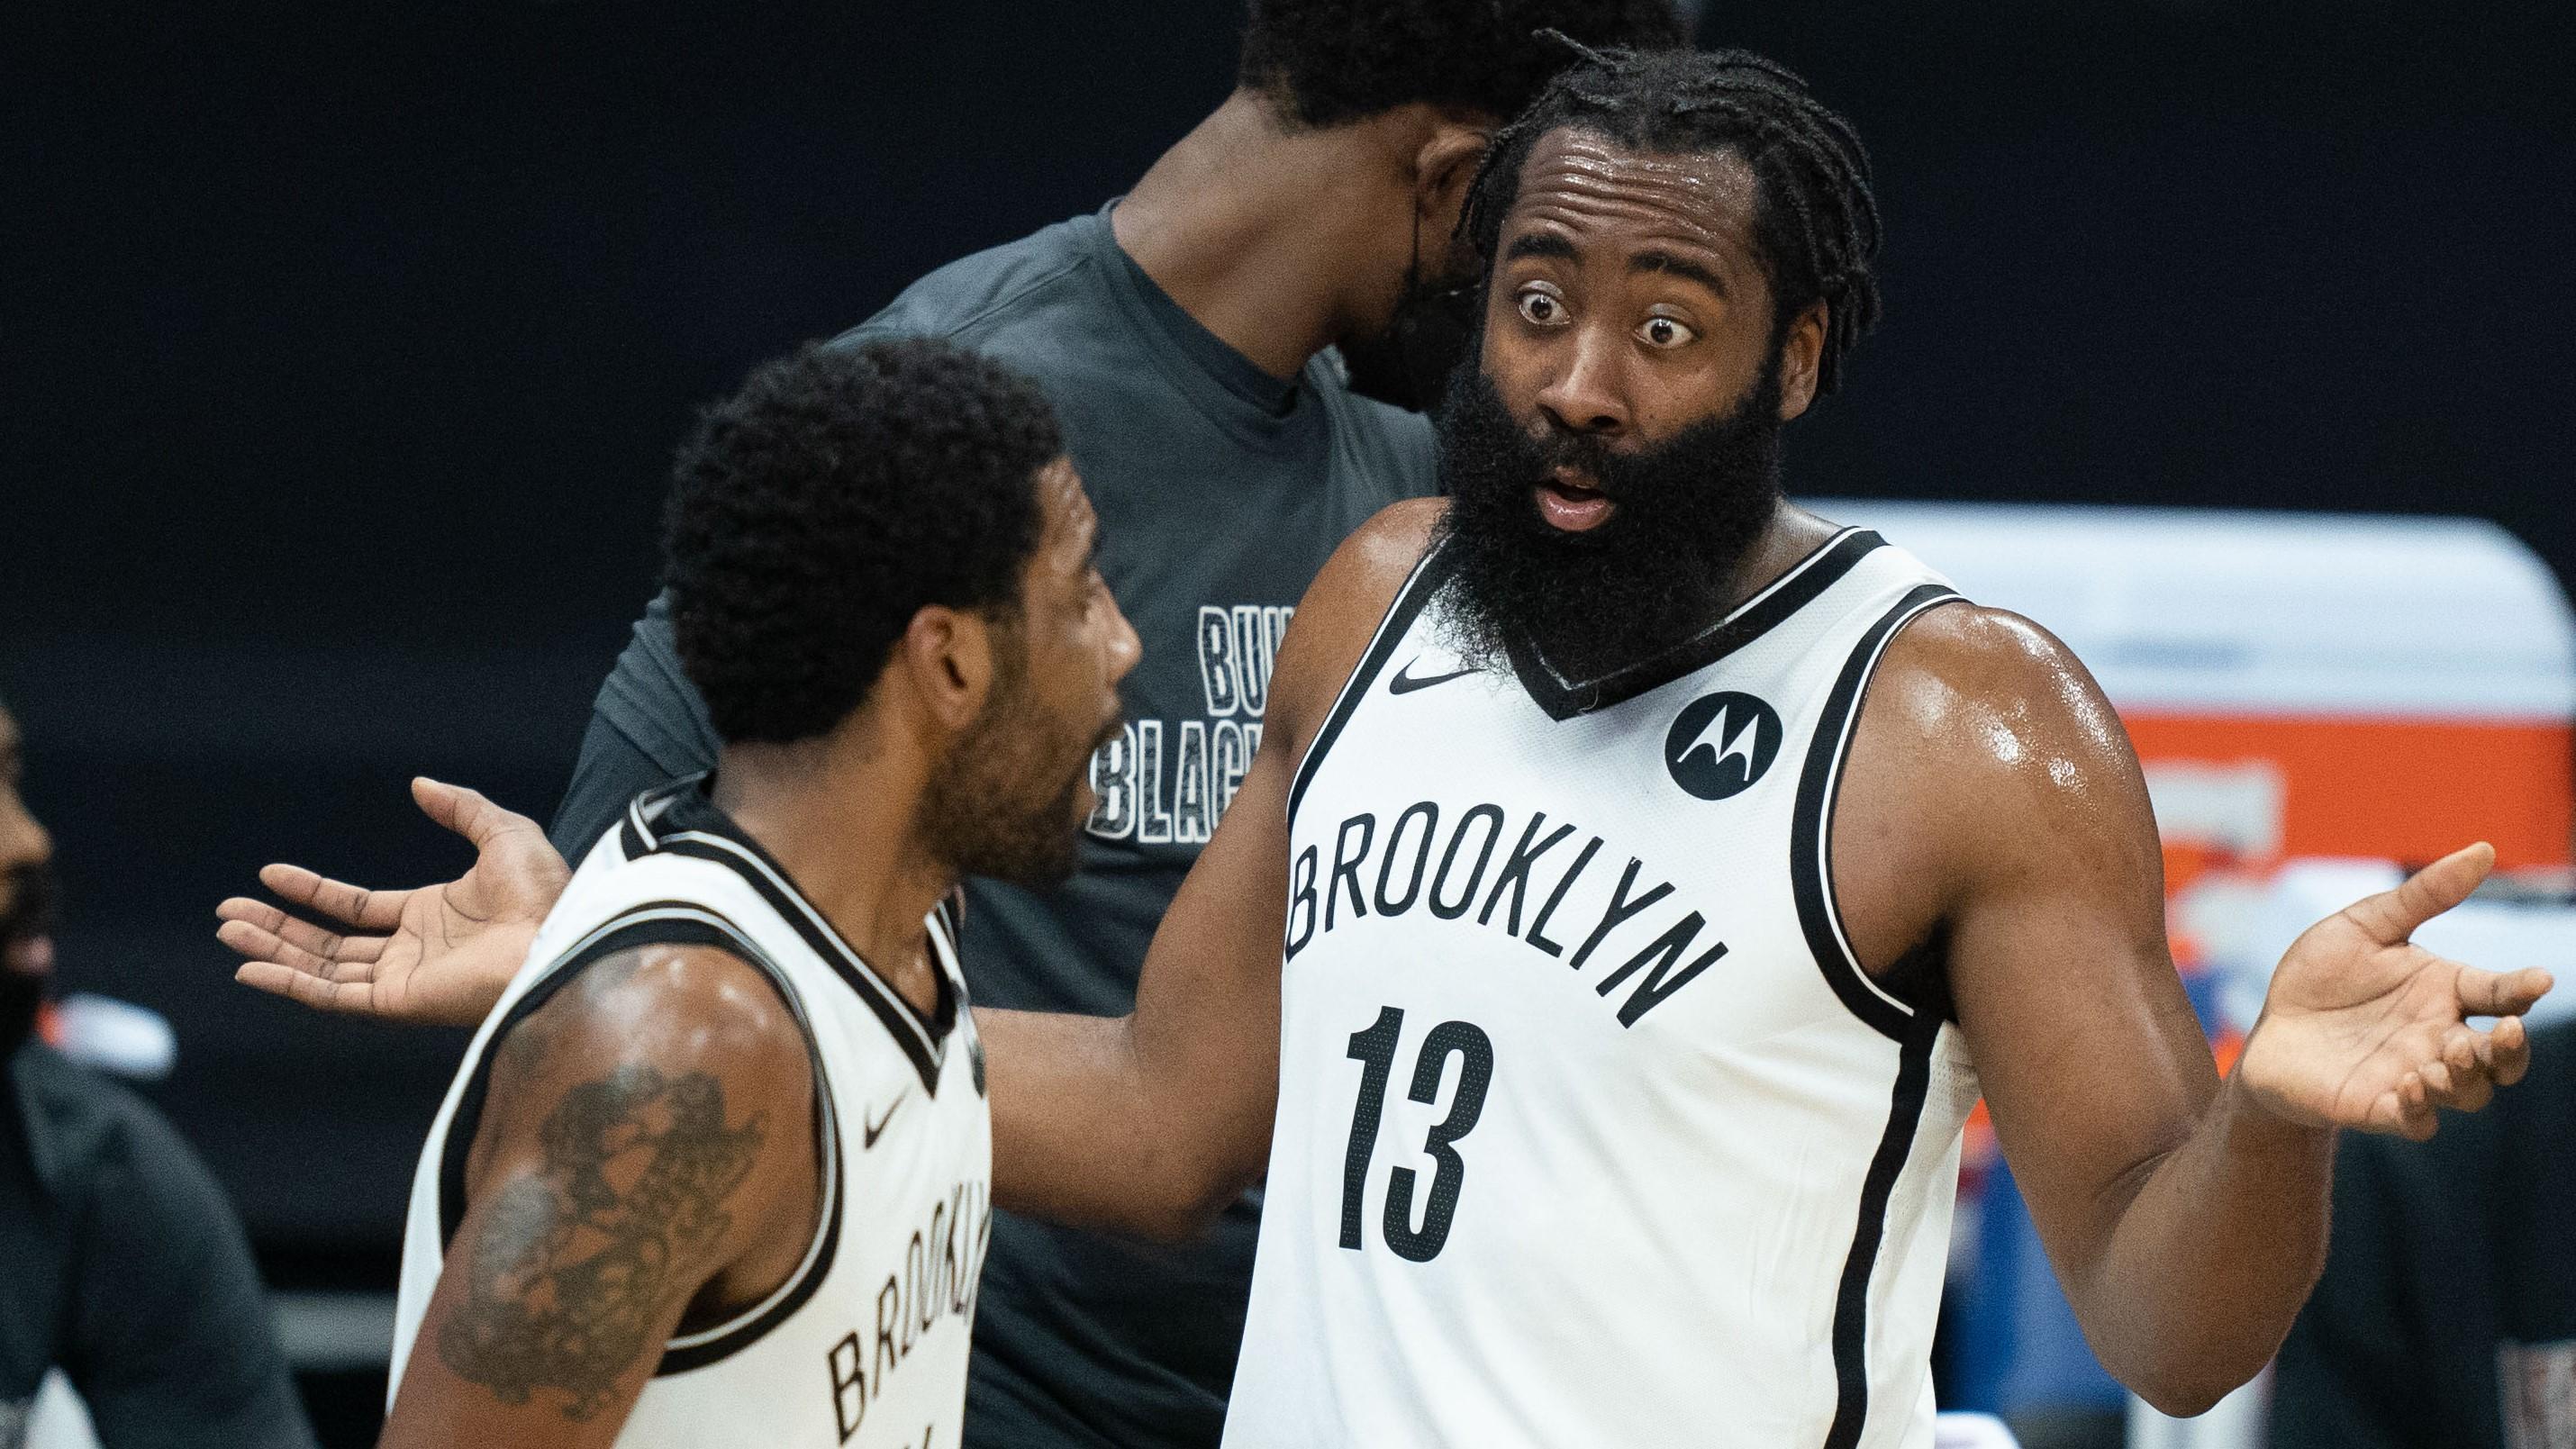 February 15, 2021; Sacramento, California, USA; Brooklyn Nets guard James Harden (13, right) and guard Kyrie Irving (11, left) during the first quarter against the Sacramento Kings at Golden 1 Center. Mandatory Credit: Kyle Terada-USA TODAY Sports / Kyle Terada-USA TODAY Sports